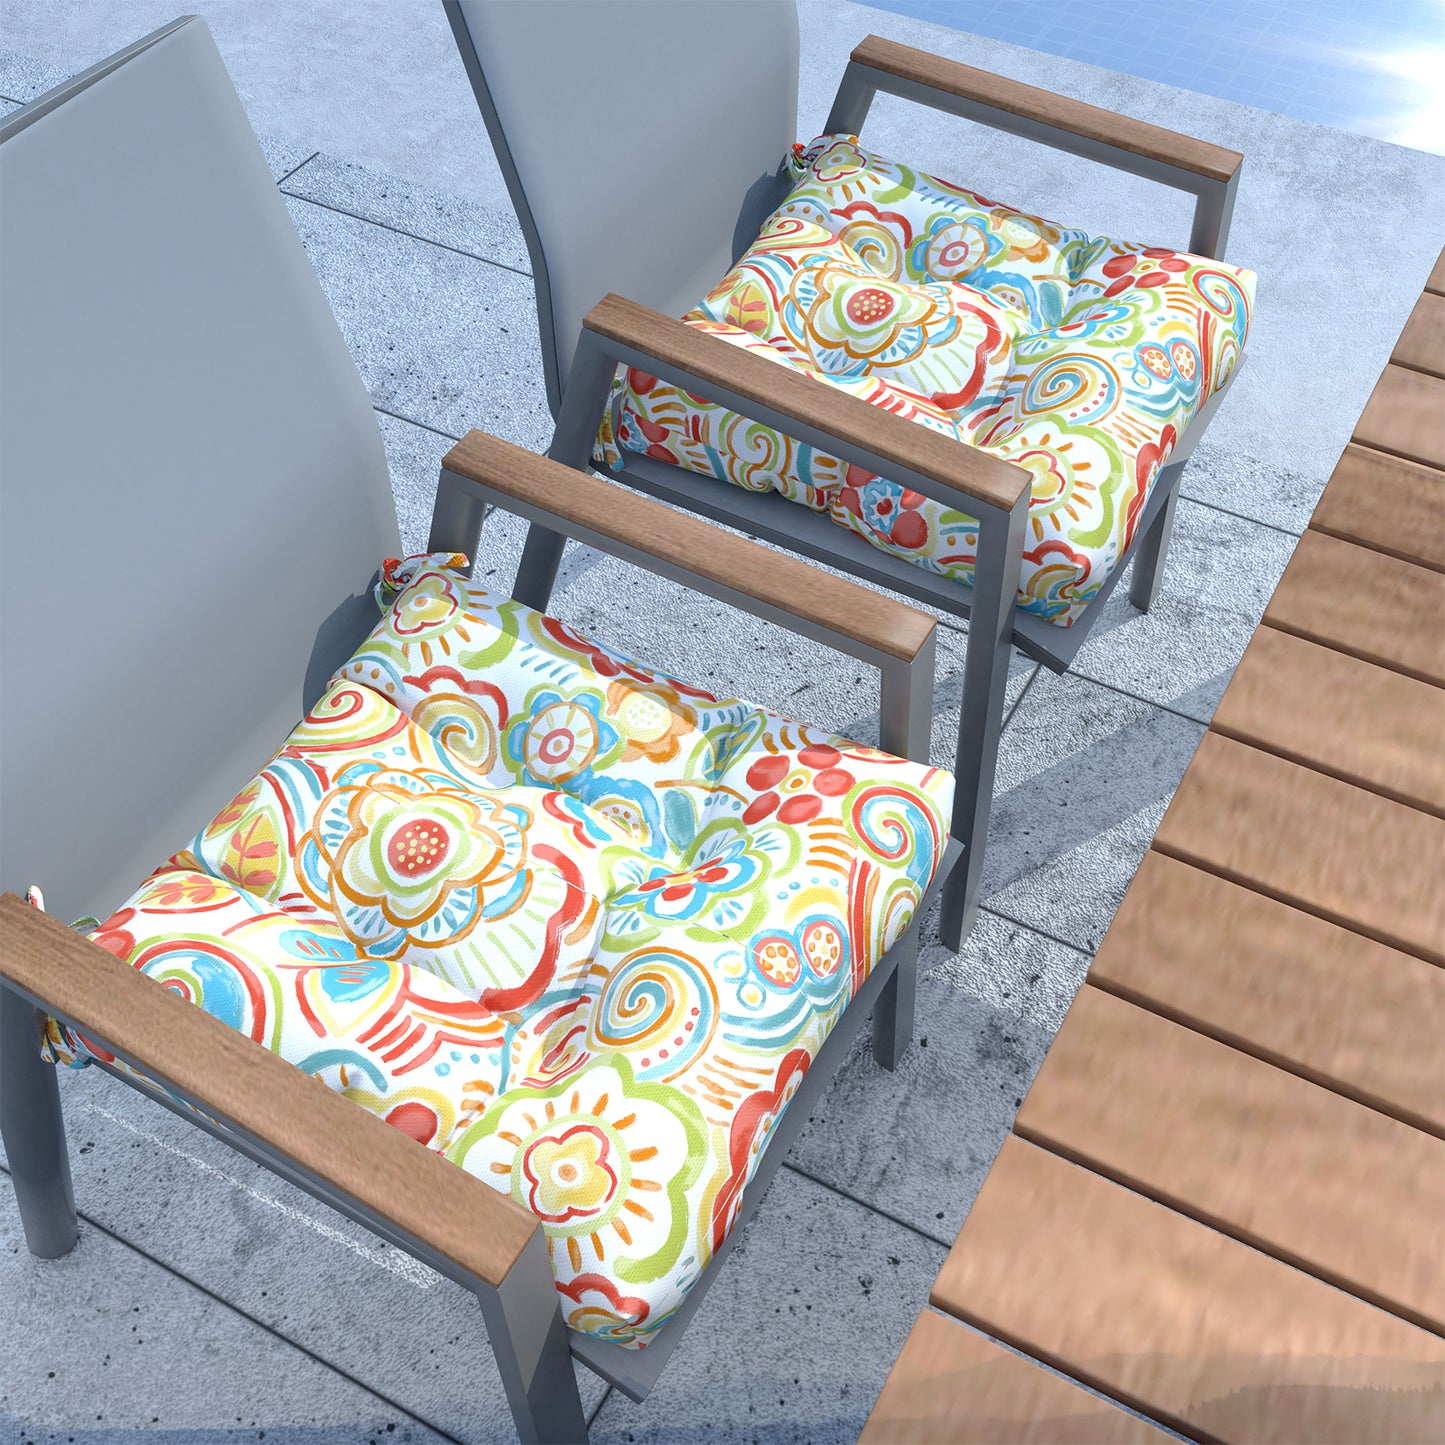 Melody Elephant Indoor/Outdoor Square Tufted Seat Cushions with Ties, Fade Resistant Patio Wicker Thick Chair Pads Pack of 2, 19 x 19 x 5 Inch, Flower Multi